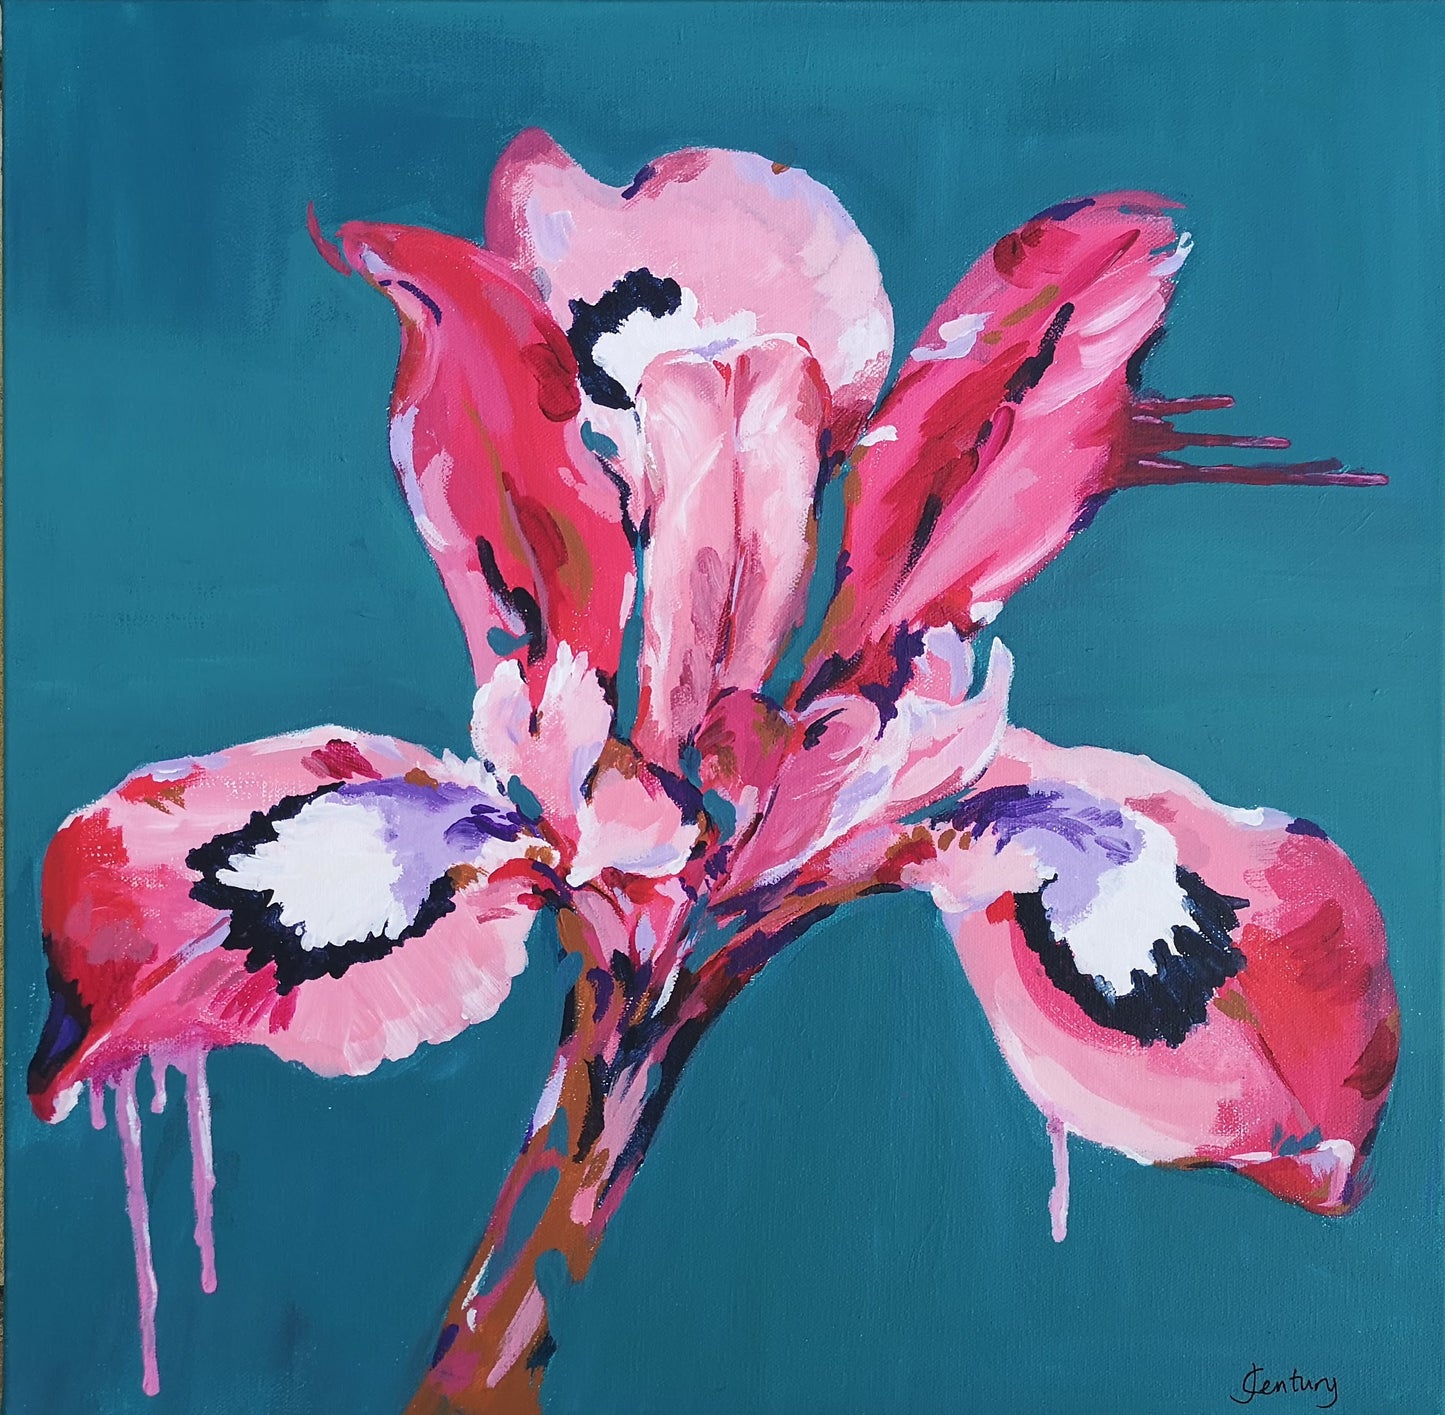 Bright Colourful Modern Iris flower canvas painting by Judy Century. Teal background with pink, white, purple and navy Iris details. Pop art style, floral abstract wall art.